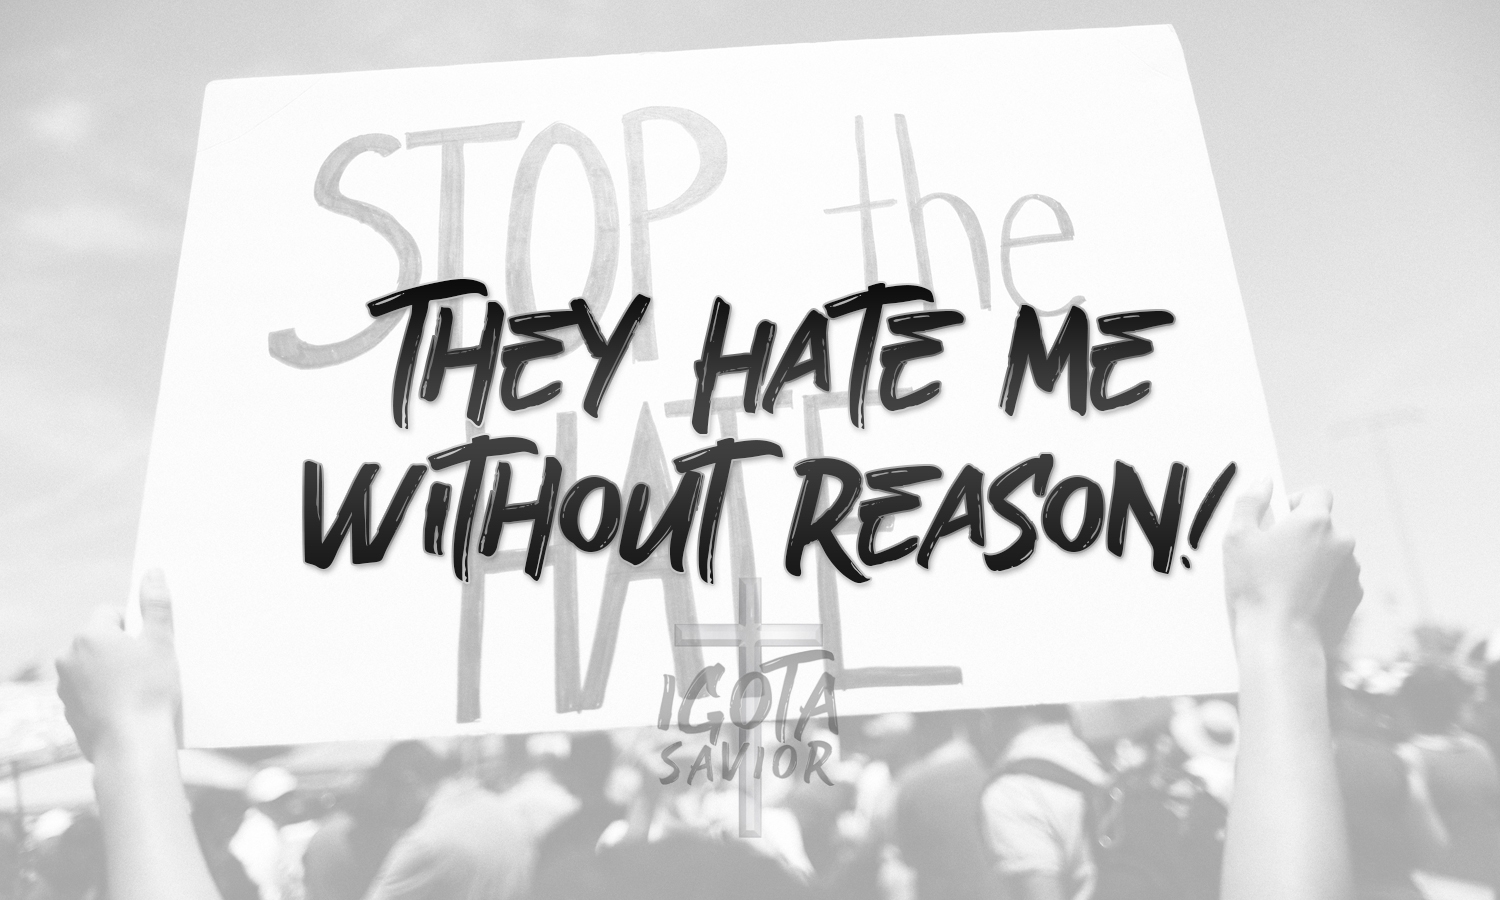 They Hate Me Without Reason!